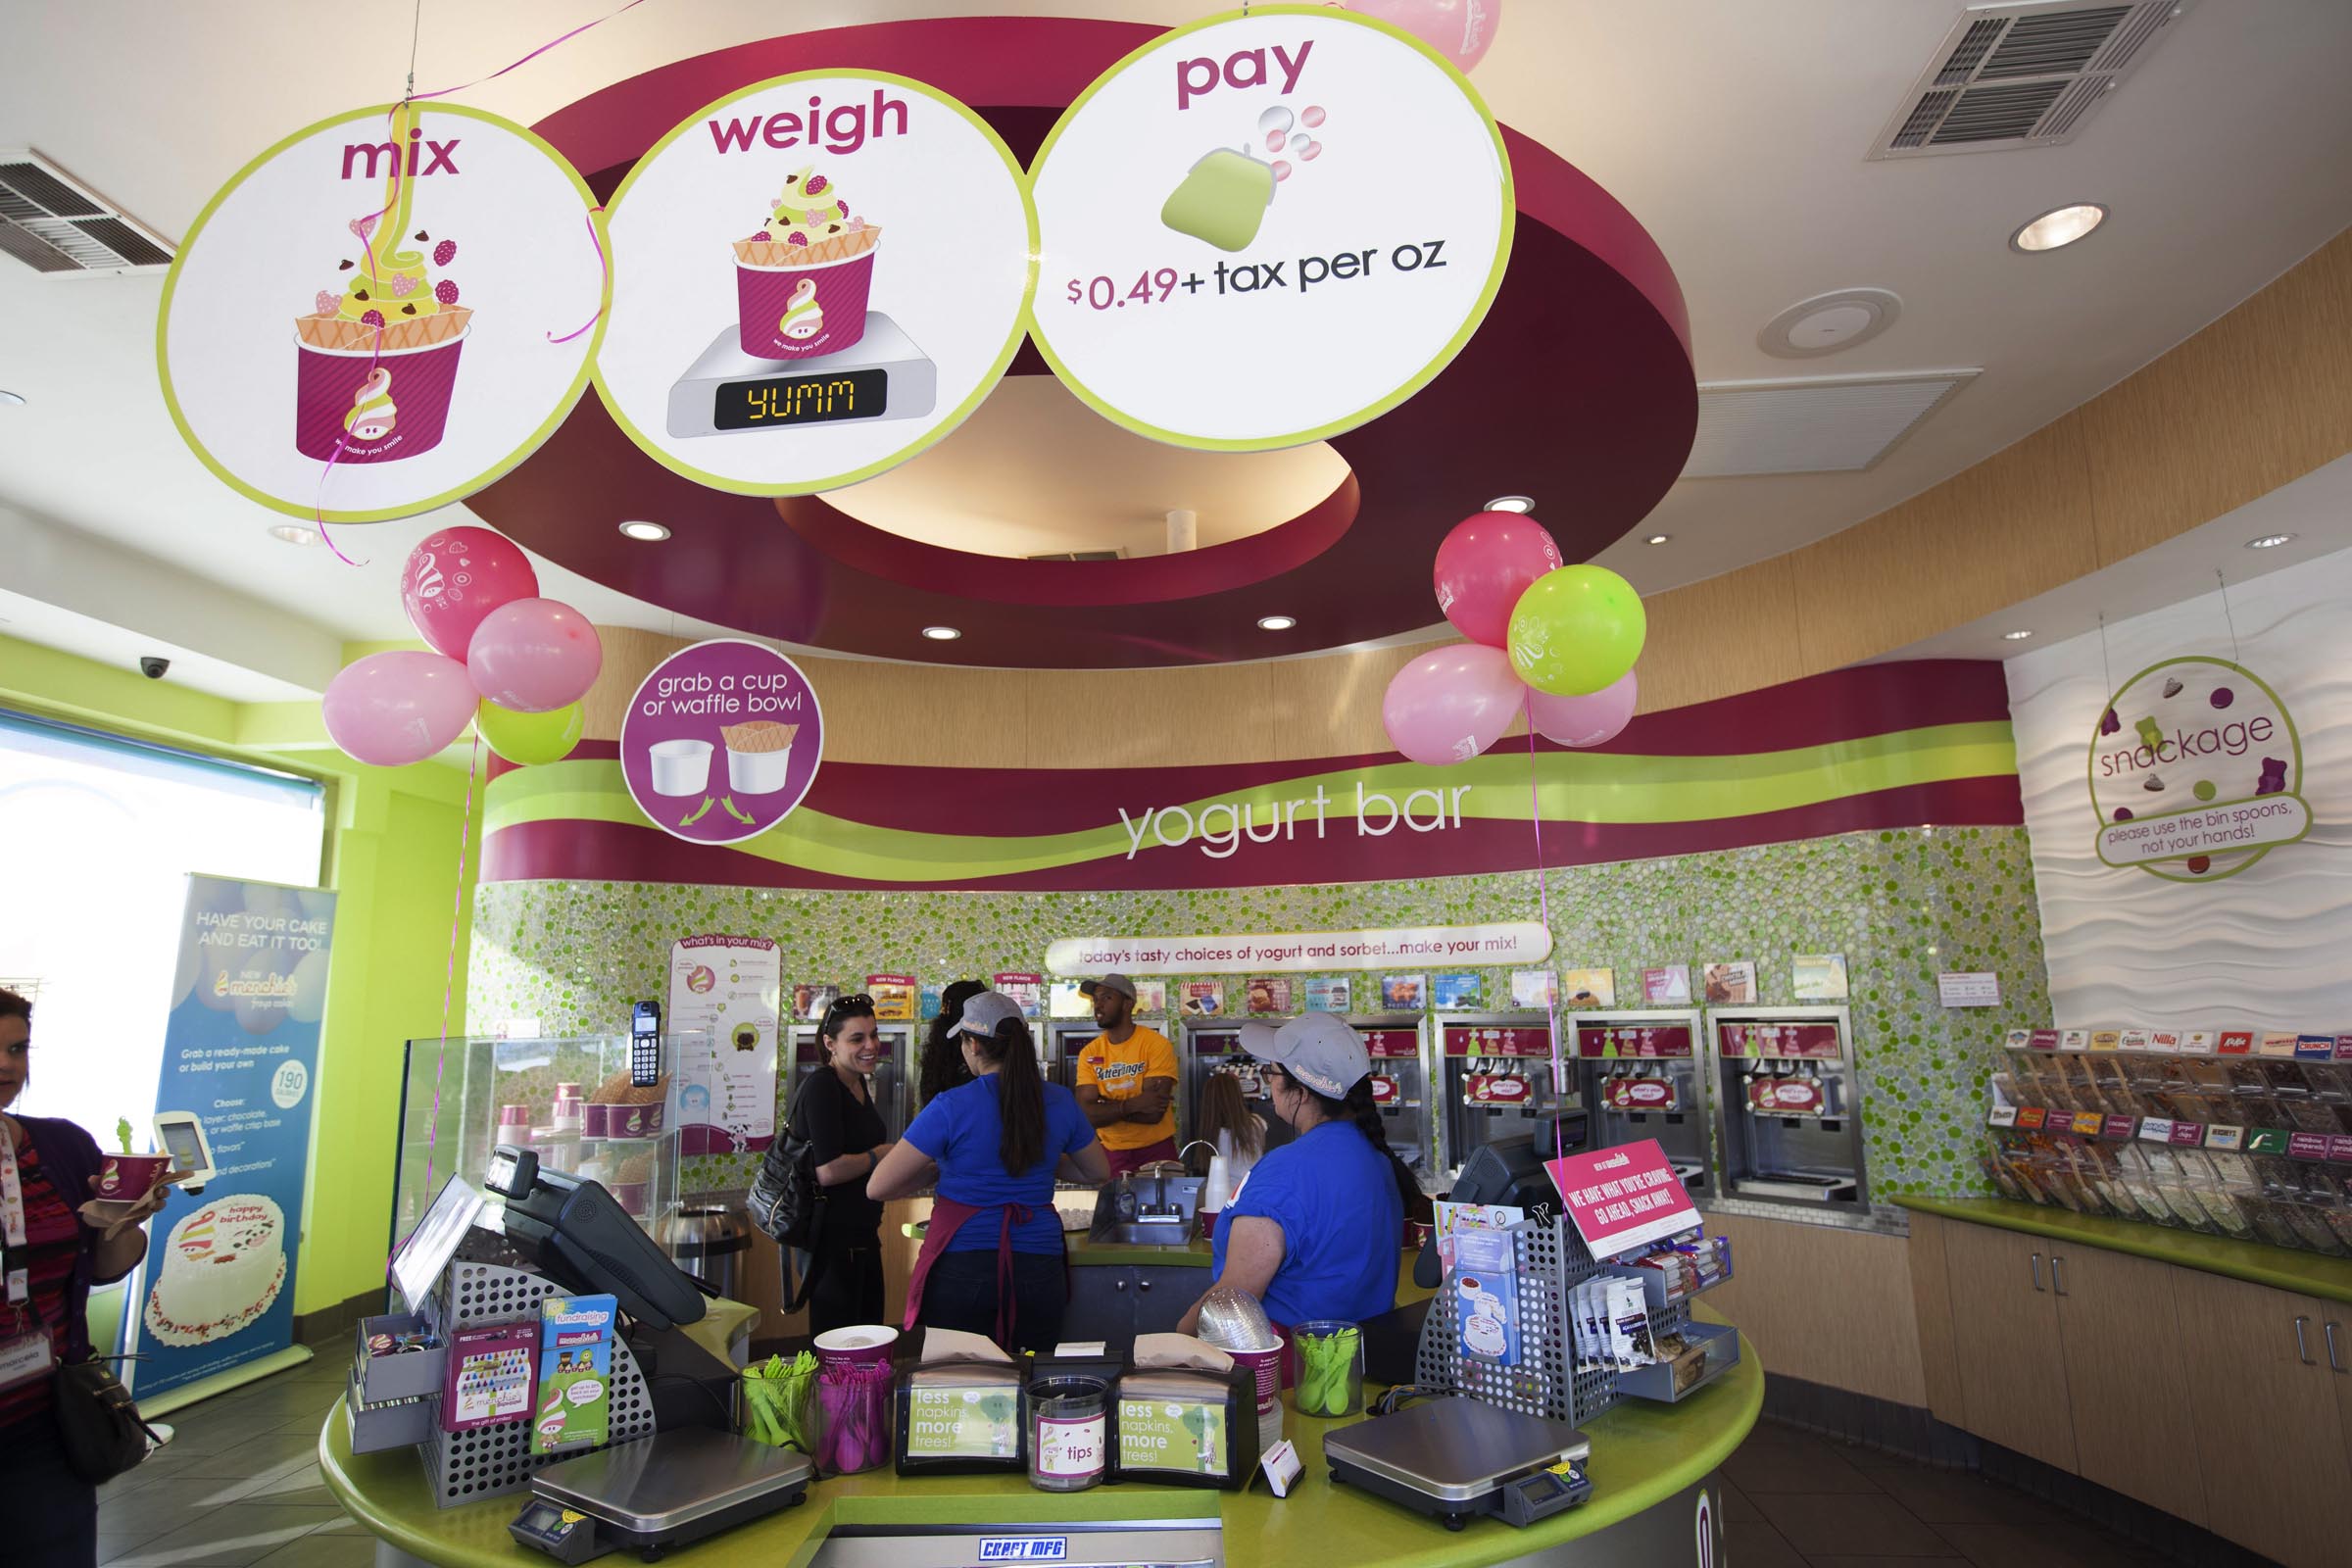 Menchie’s employees help guests weigh and pay for their frozen yogurt.